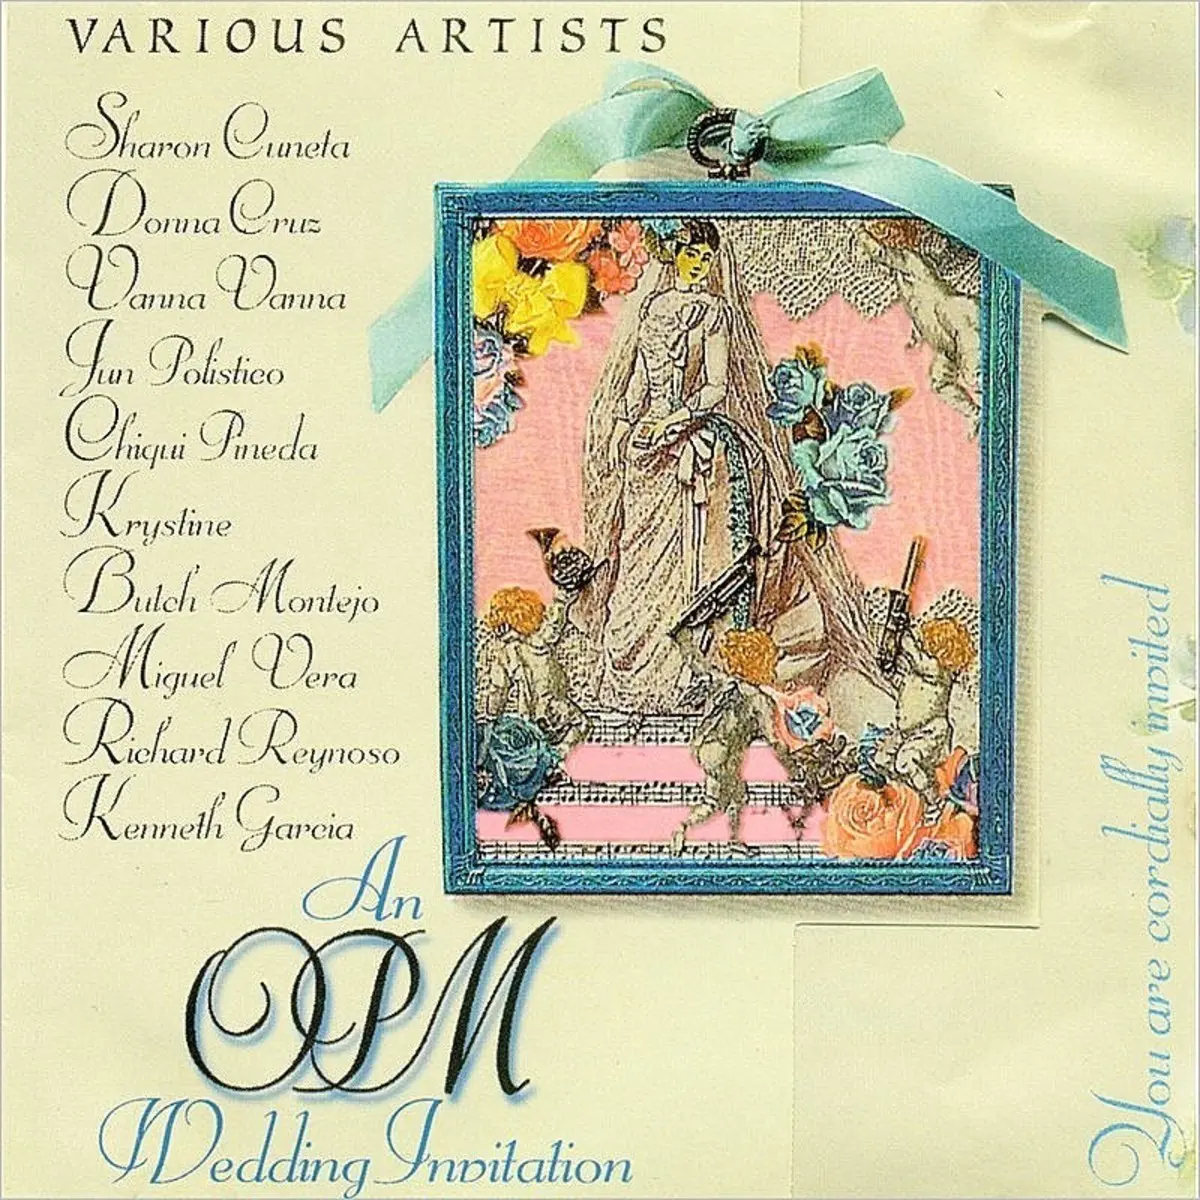 An Opm Wedding Invitation Songs Download An Opm Wedding